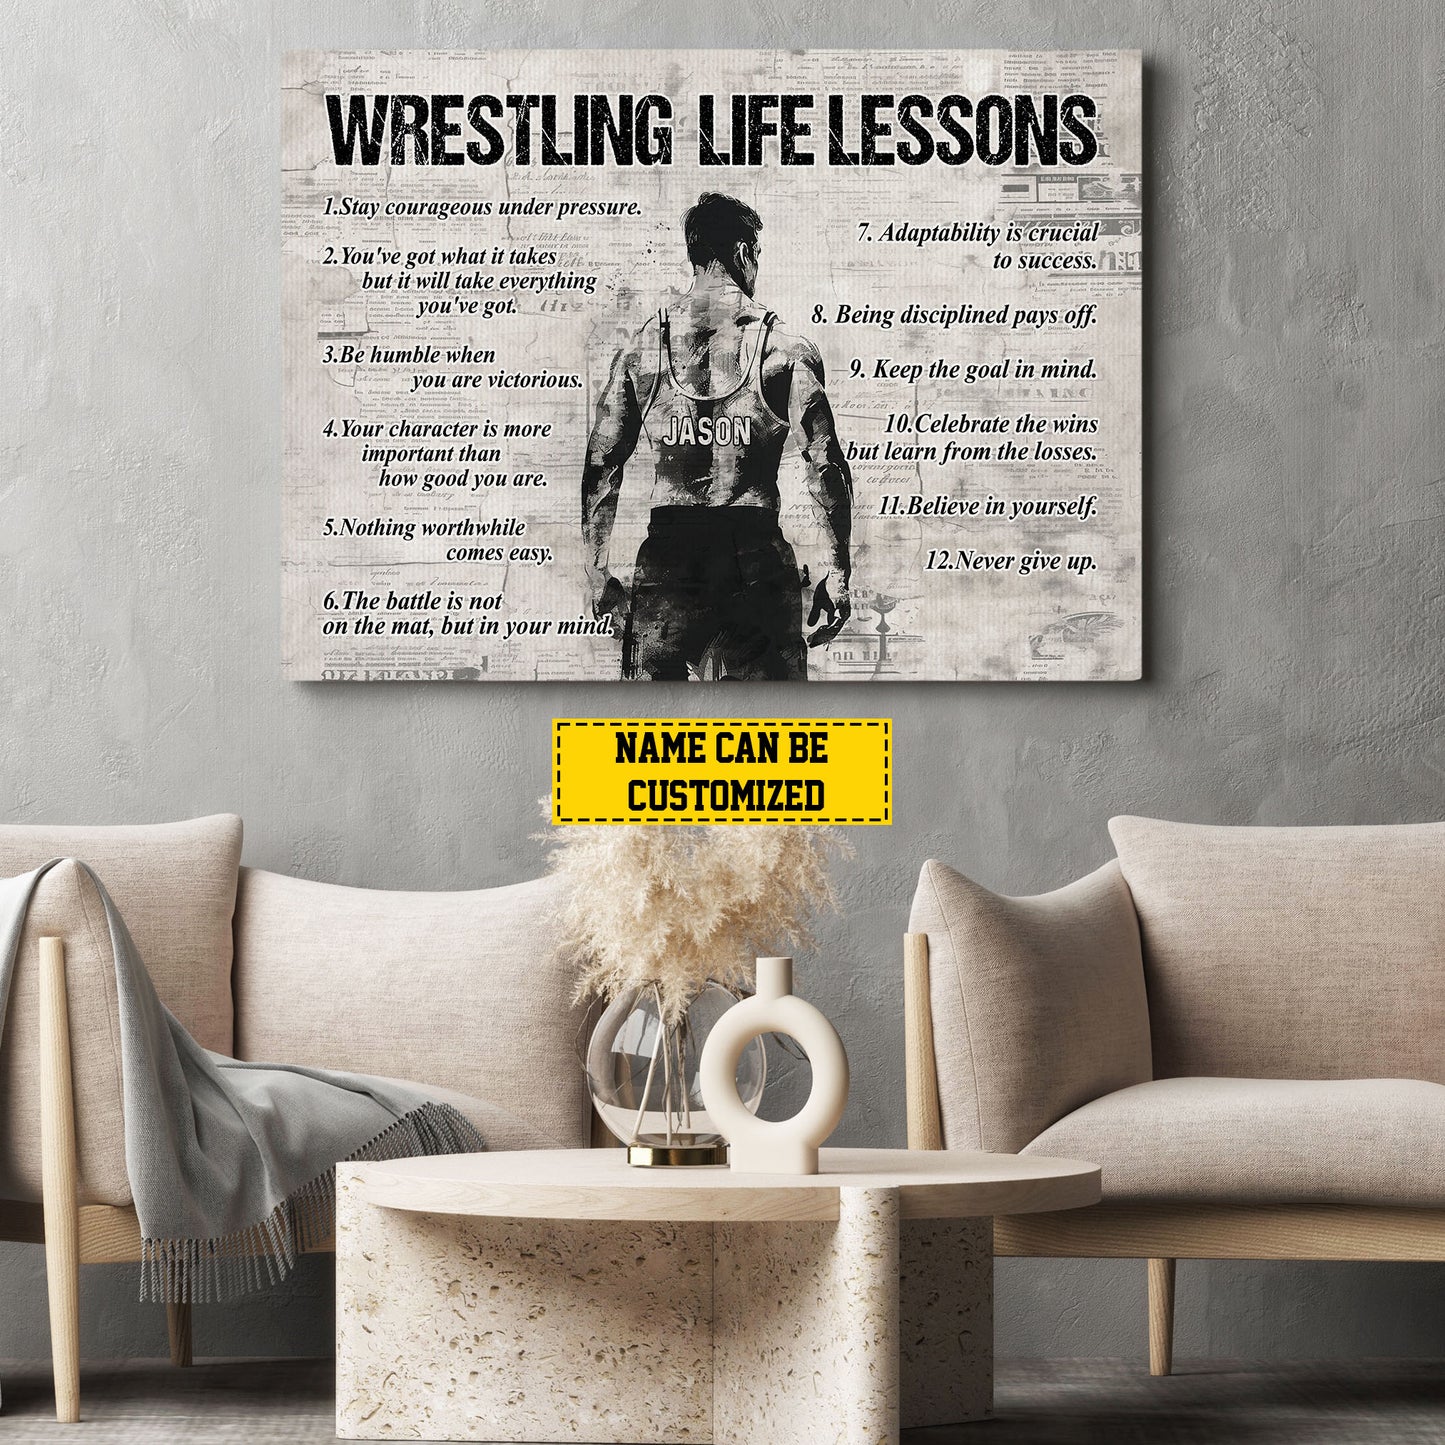 Wrestling Life Lessons, Personalized Motivational Wrestling Canvas Painting, Inspirational Quotes Wall Art Decor, Poster Gift For Wrestling Lovers